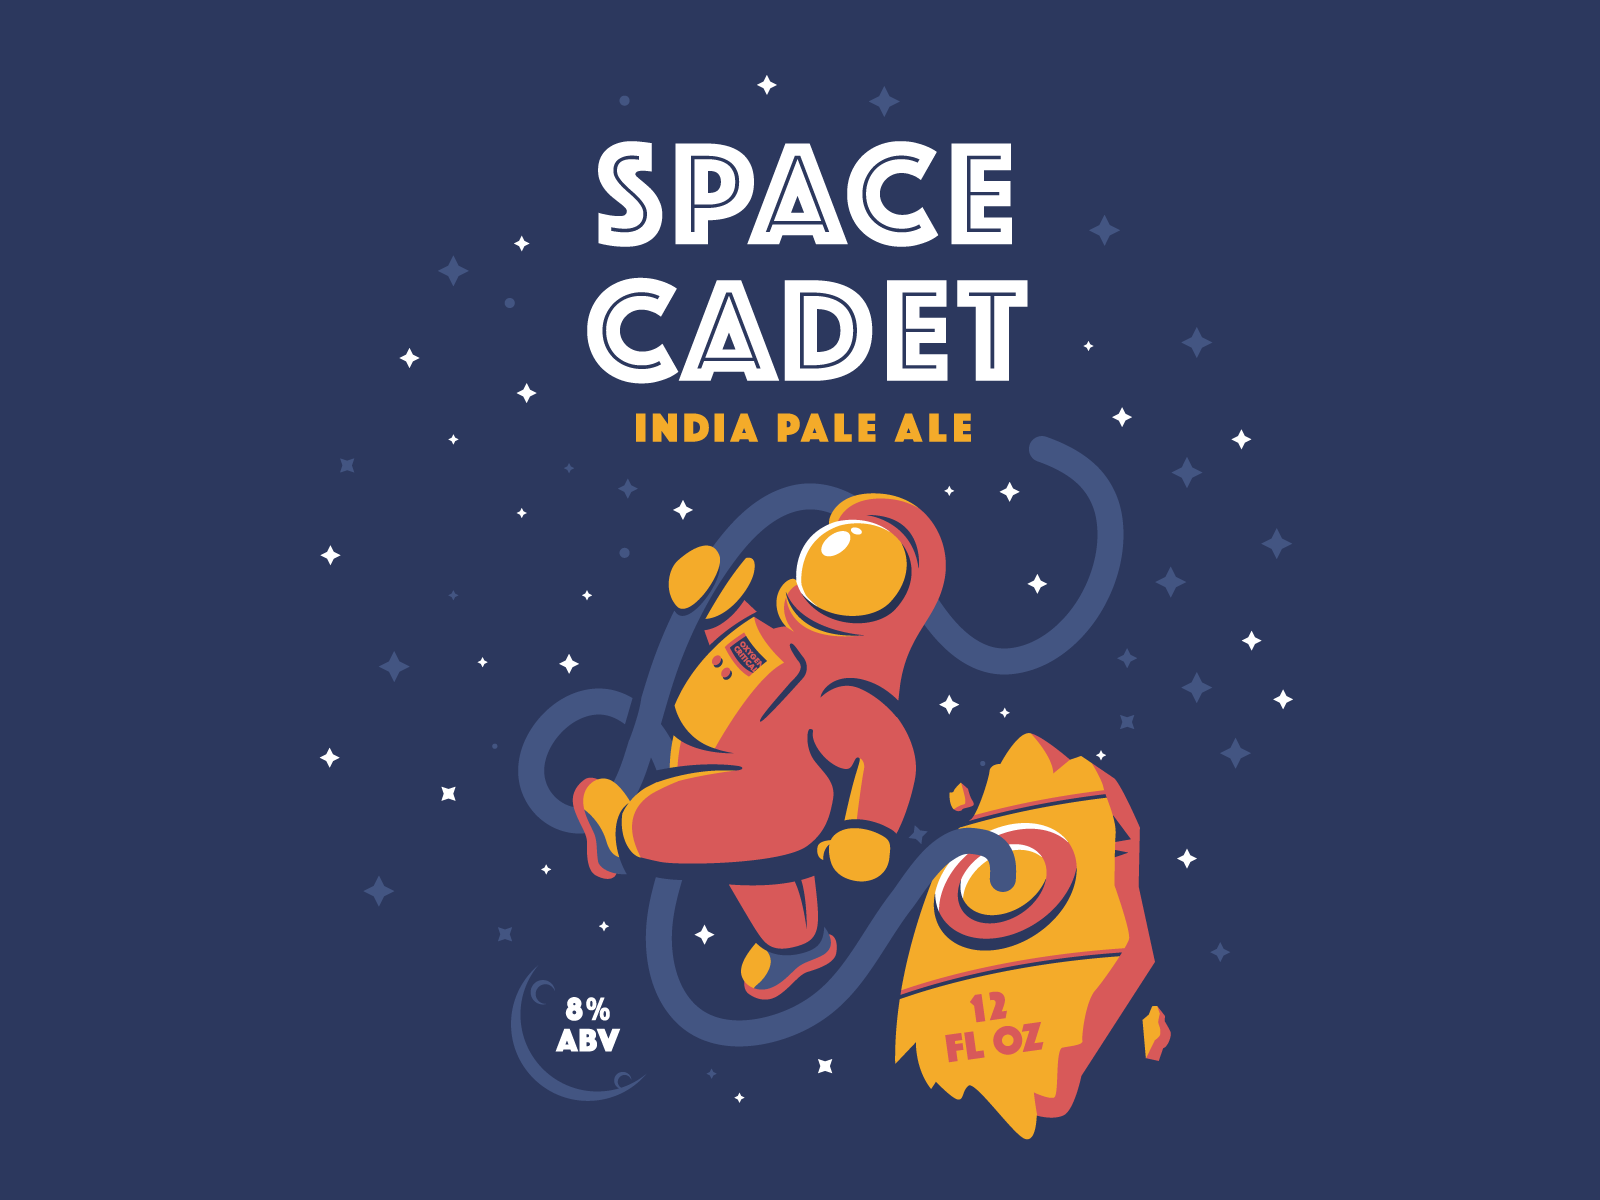 Beer label illustration of an astronaut floating in space